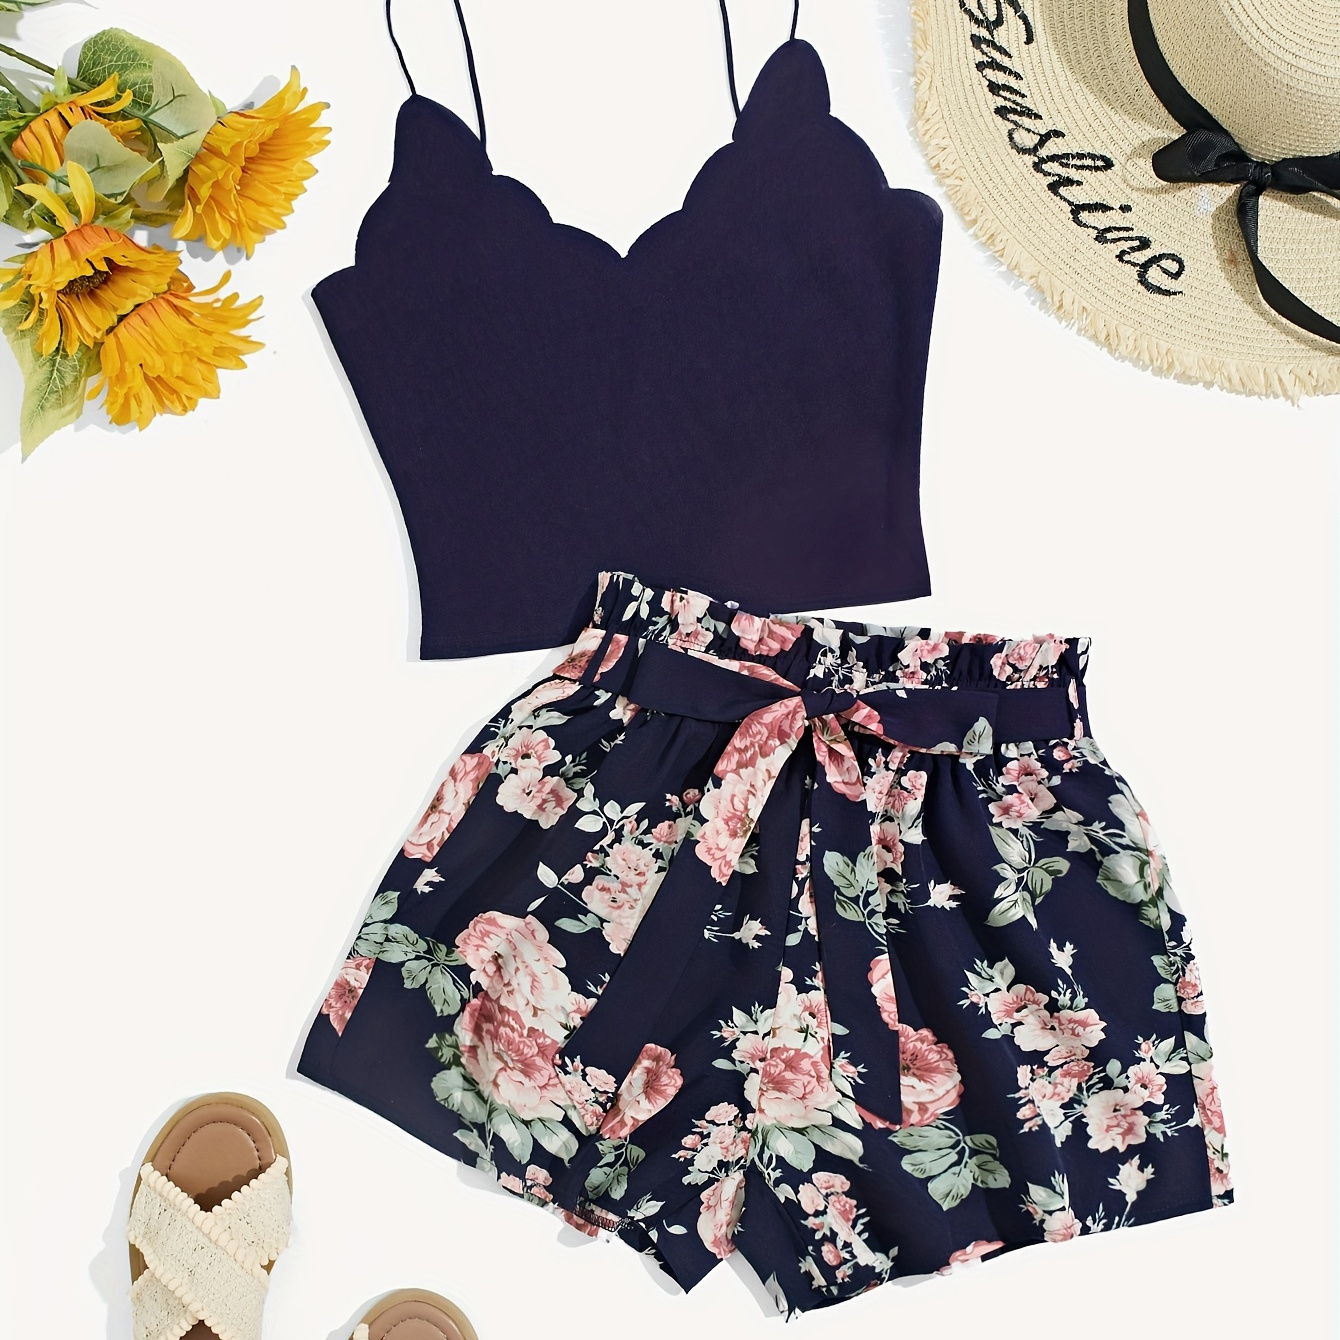 

Floral Print Shorts Elegant Set, Solid Scallop Trim V-neck Spaghetti Strap Cami Top & Belted Shorts Outfits, Women's Clothing